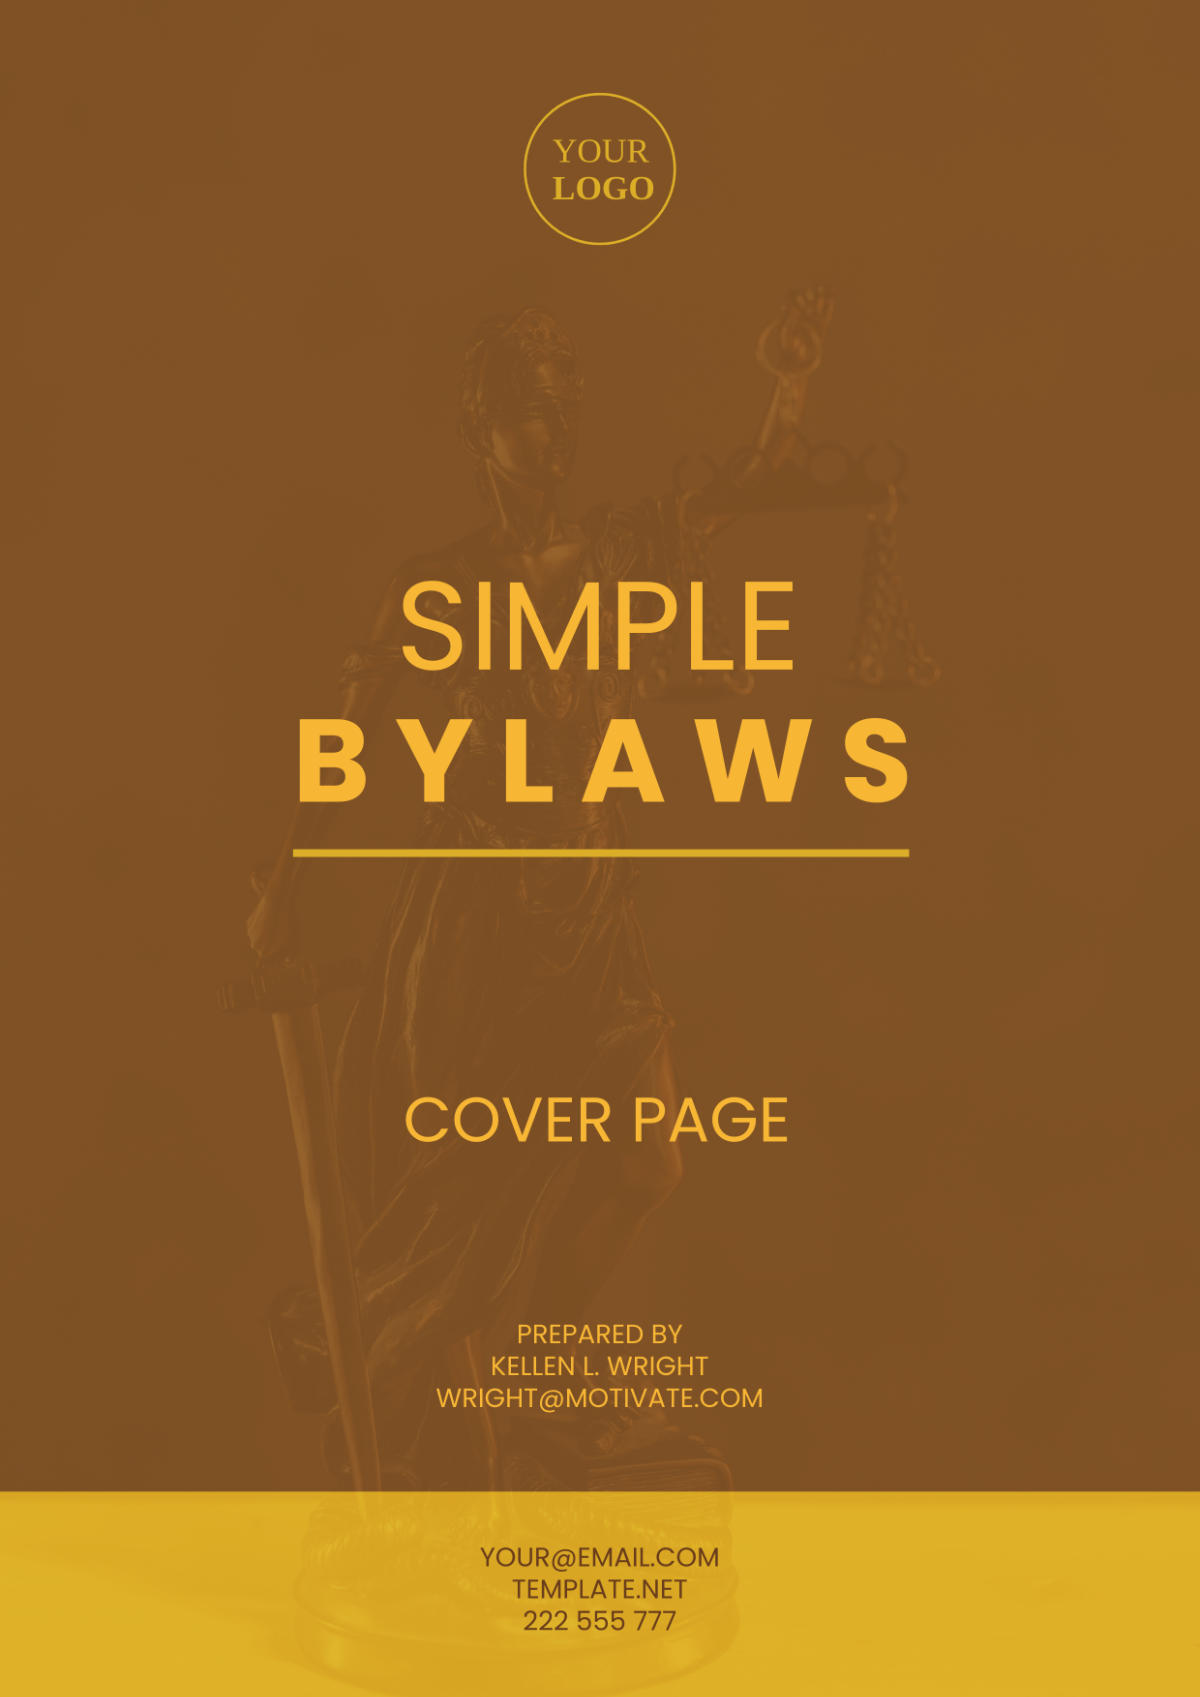 Simple Bylaws Cover Page Template